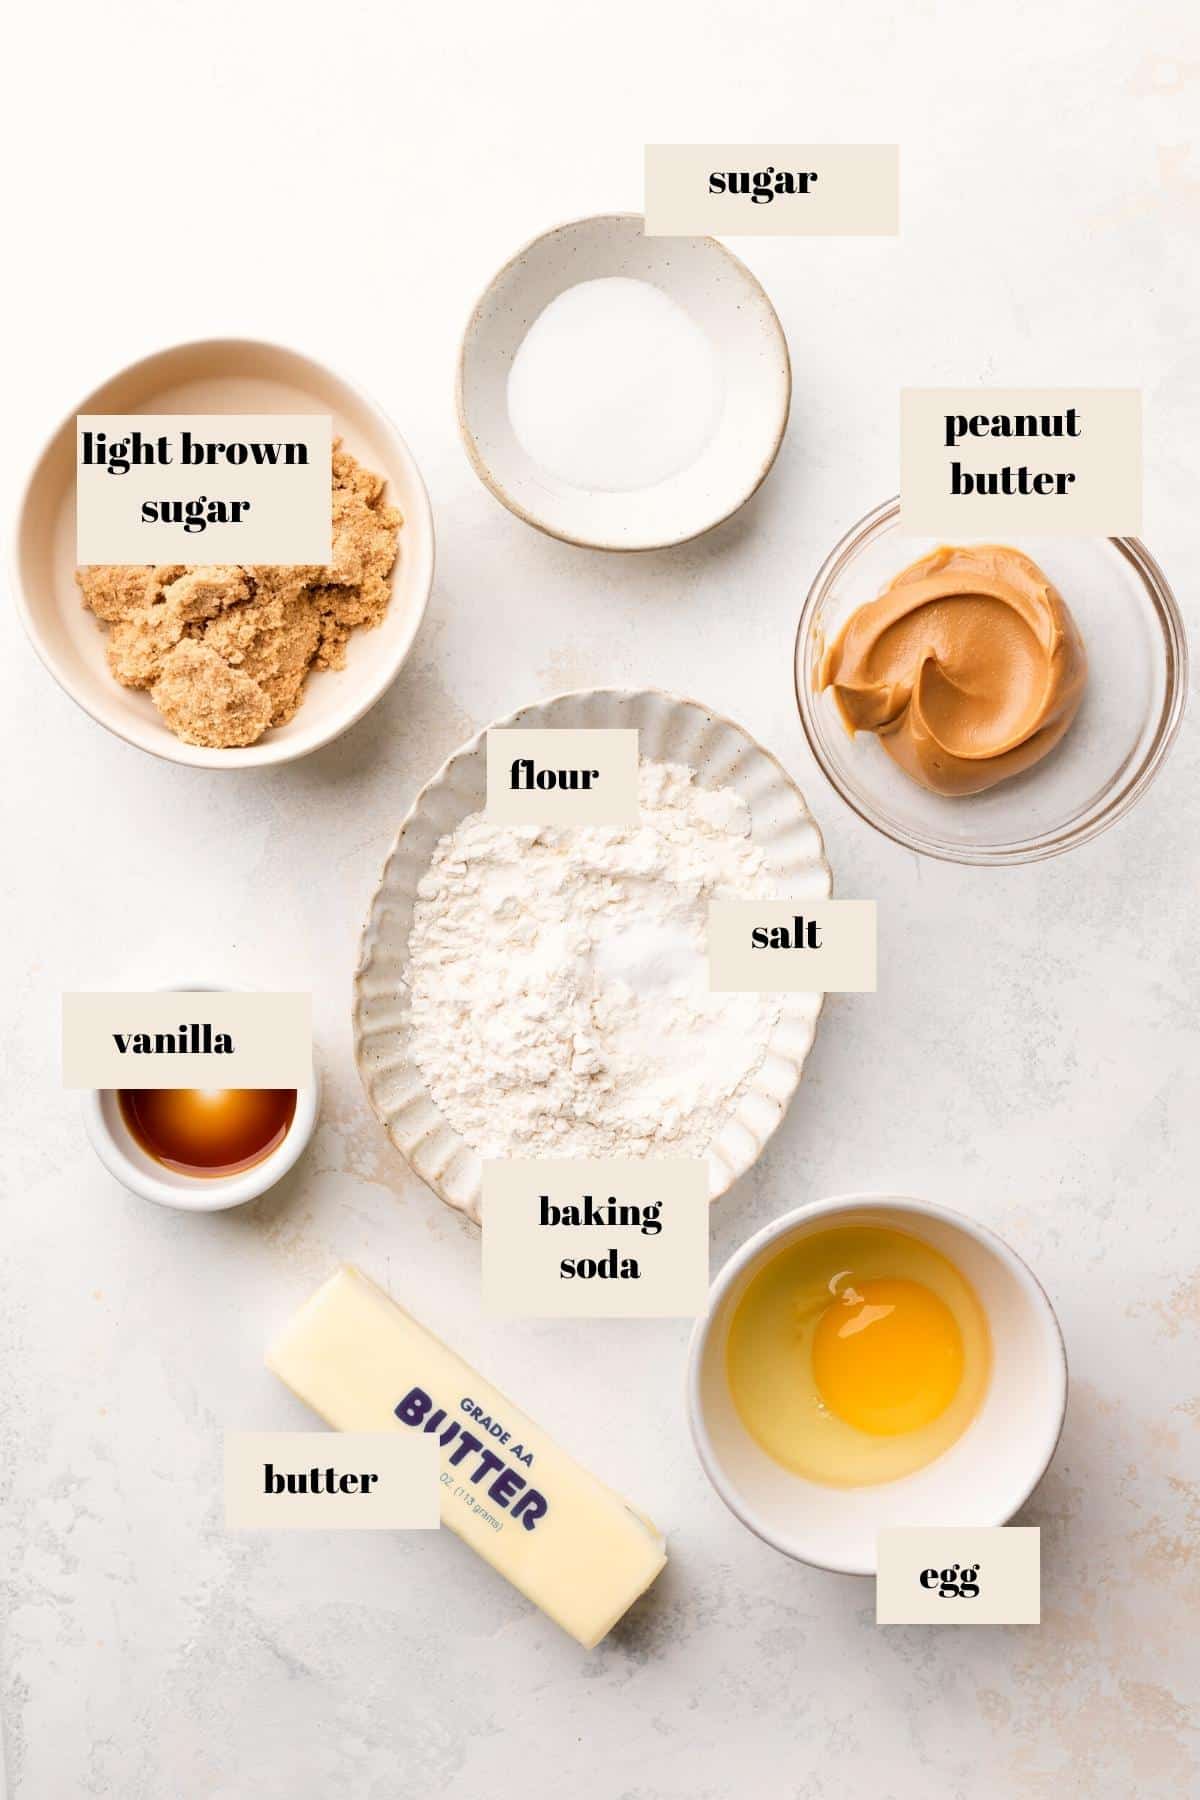 ingredients needed for the peanut butter cookie dough.